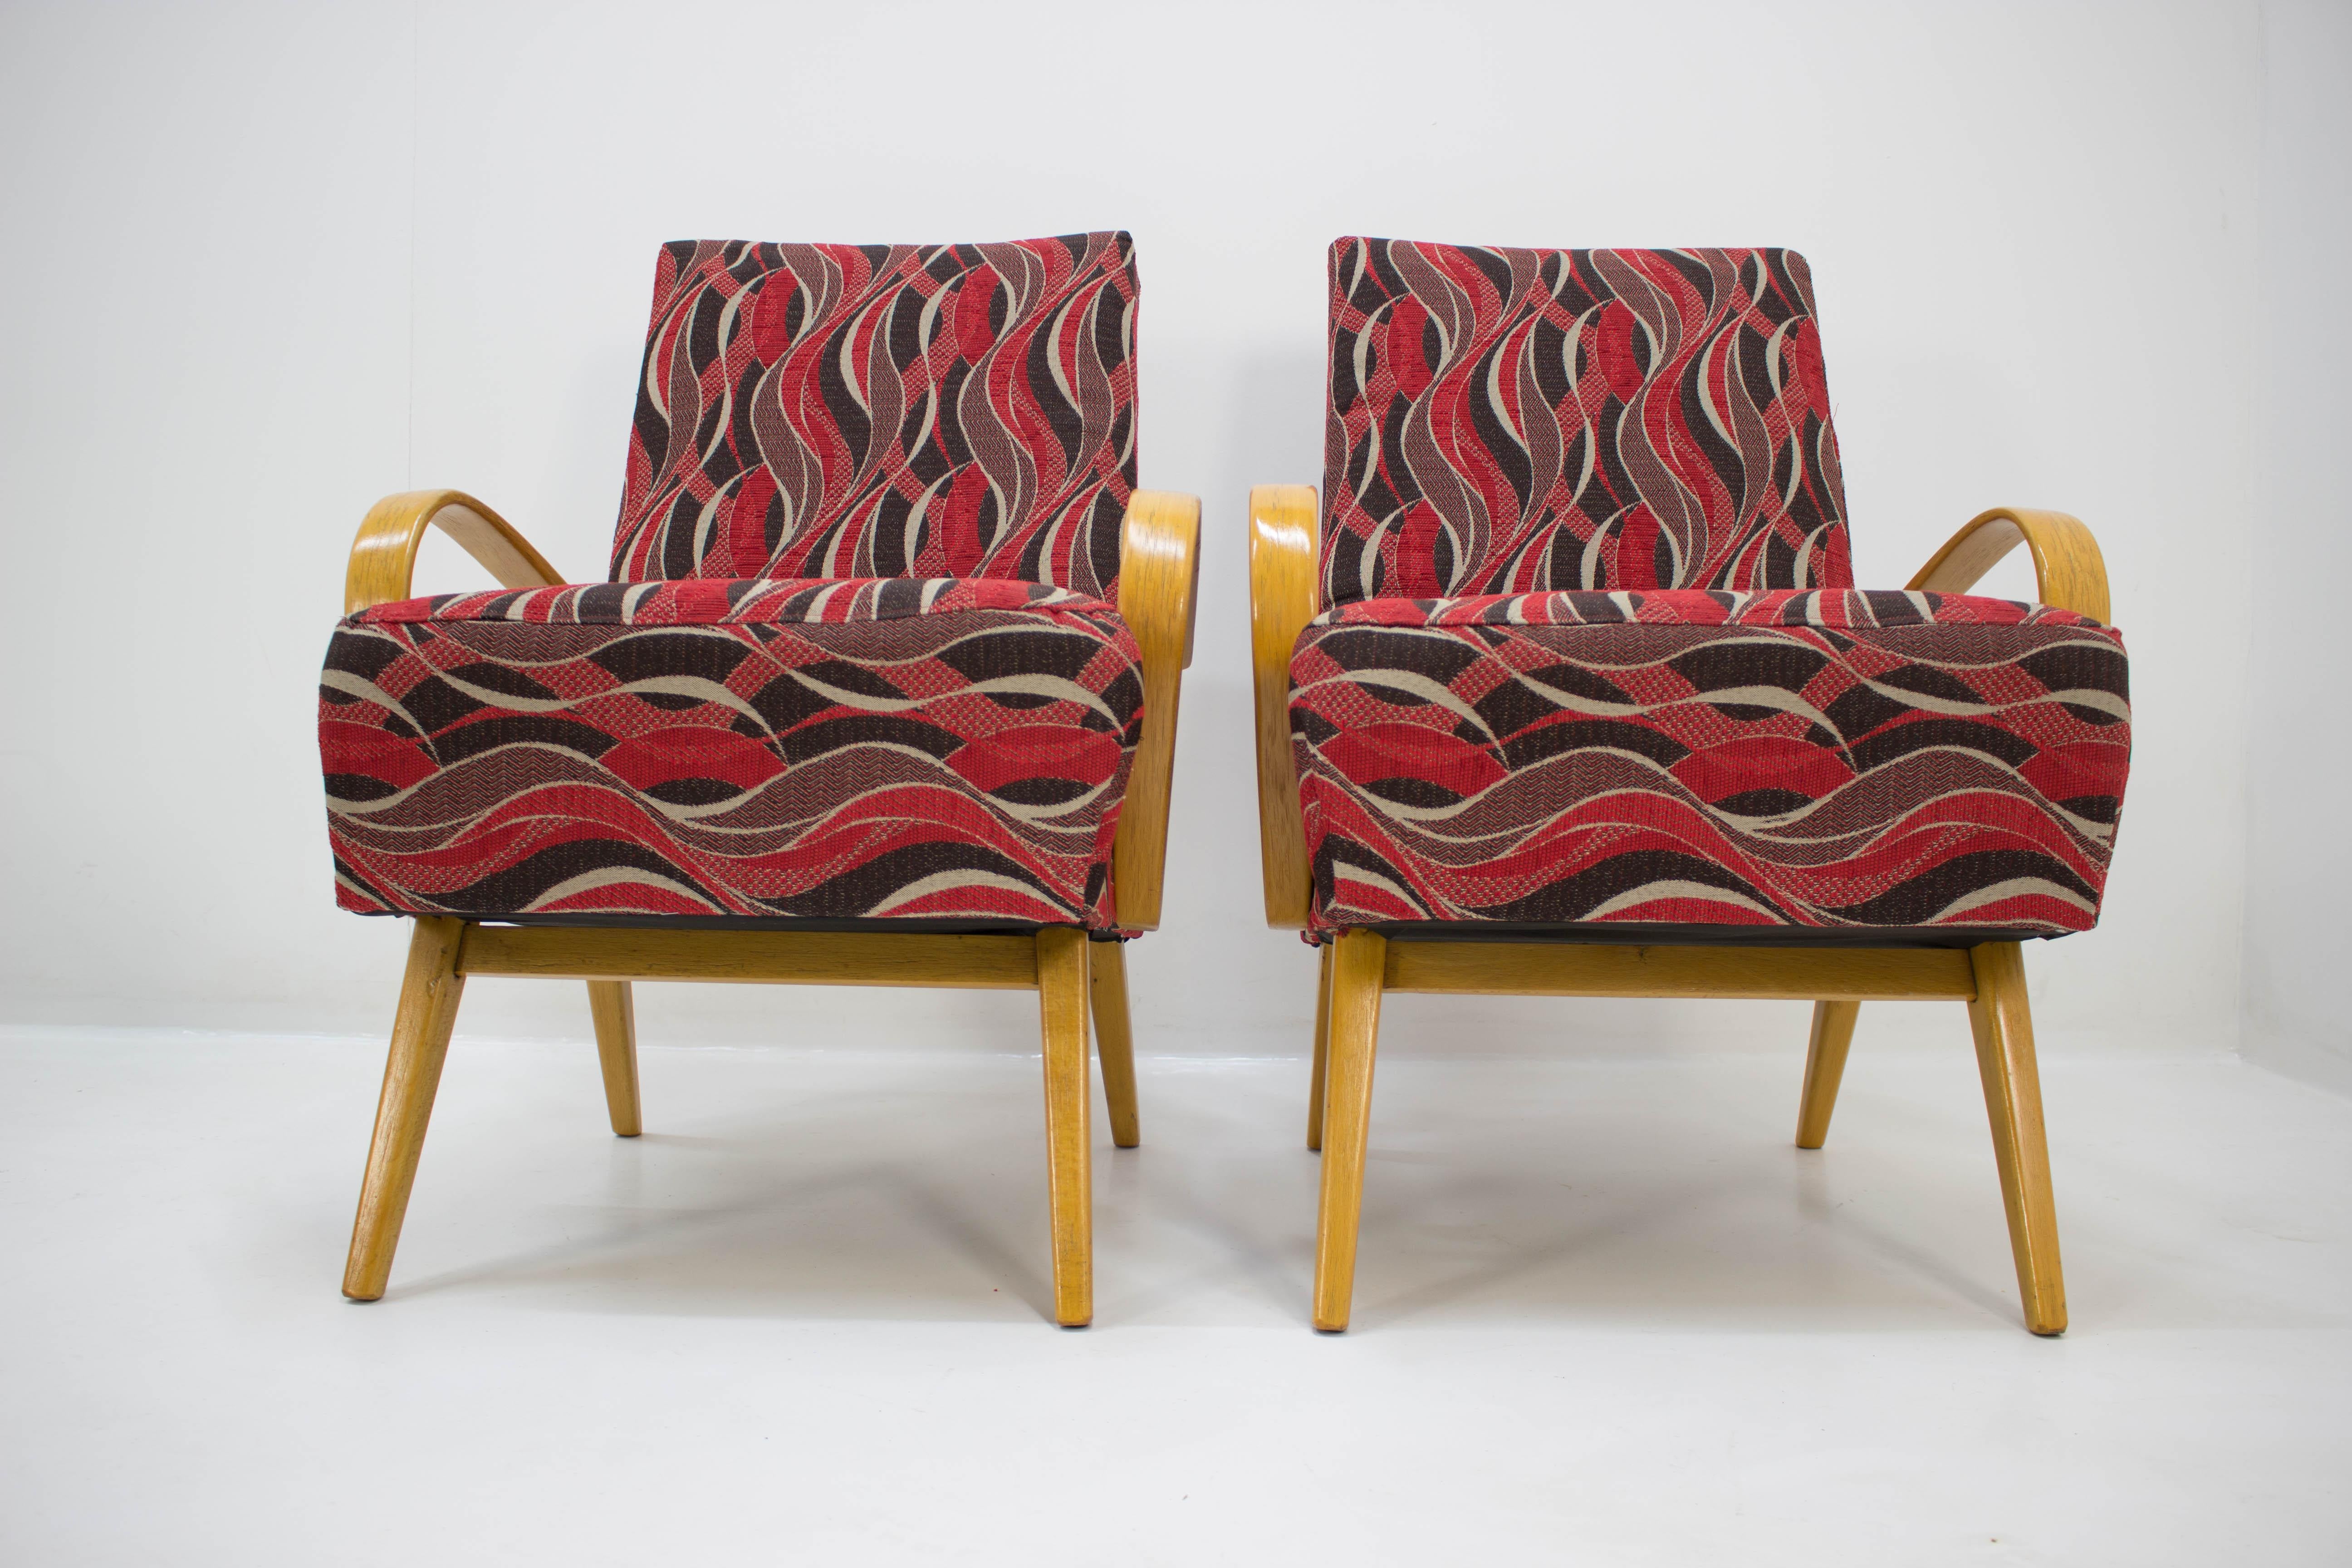 This is a pair of type 53 armchairs designed by architect Jaroslav Smidek and manufactured by TON during the 1960s. It features a bent beech frame and crazy timeless colored upholstery. This piece represents the Brussels style, which formed after